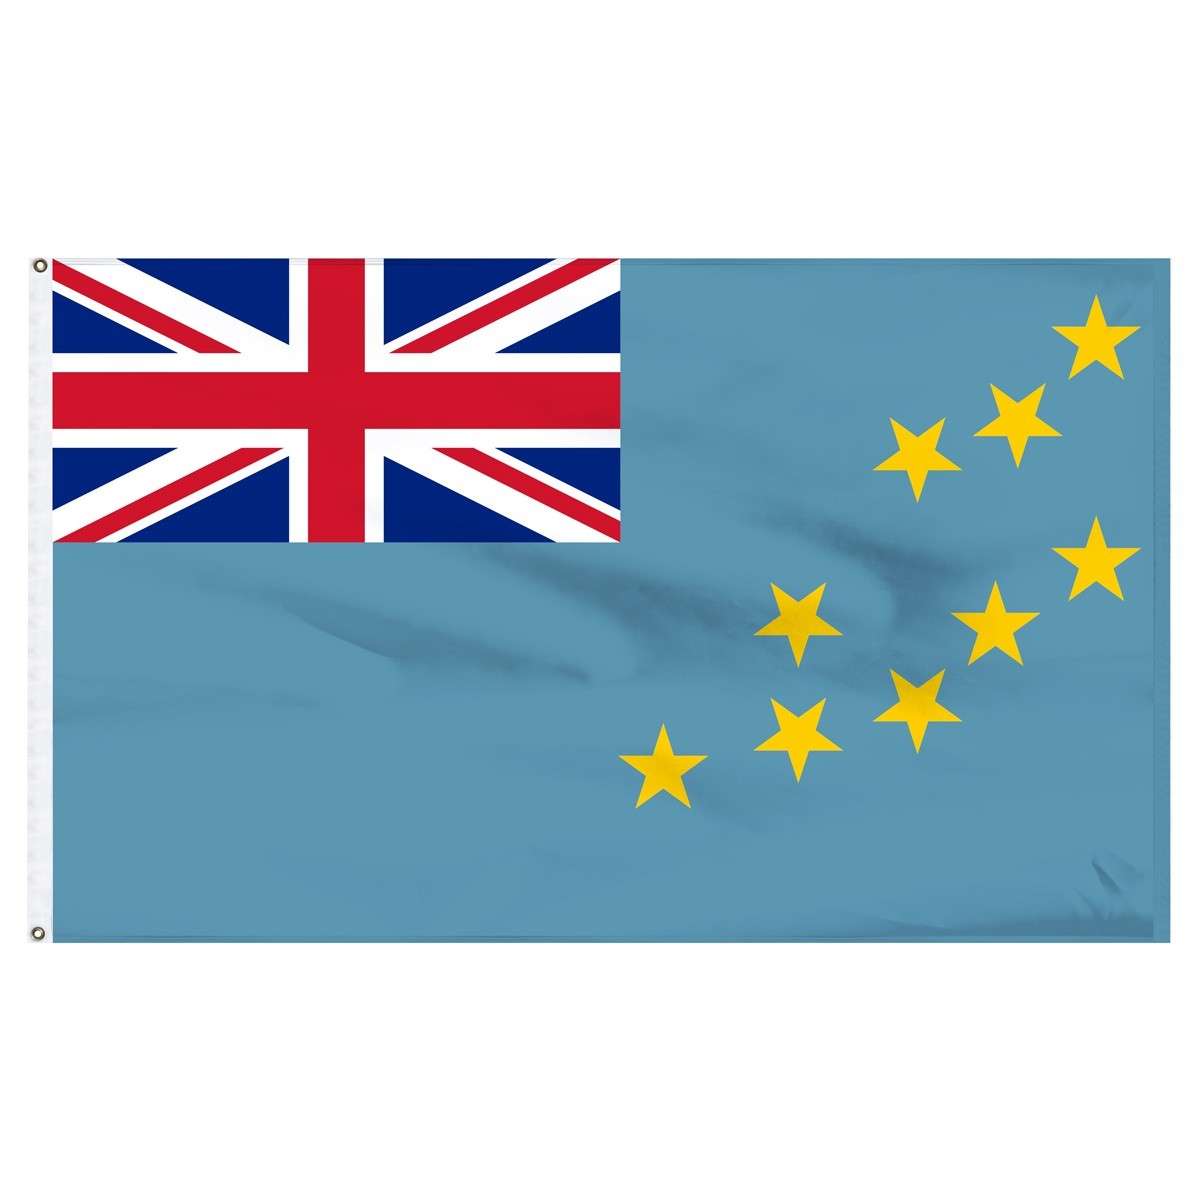 Tuvalu Flags For Sale Indoor and Outdoor by 1-800 Flags